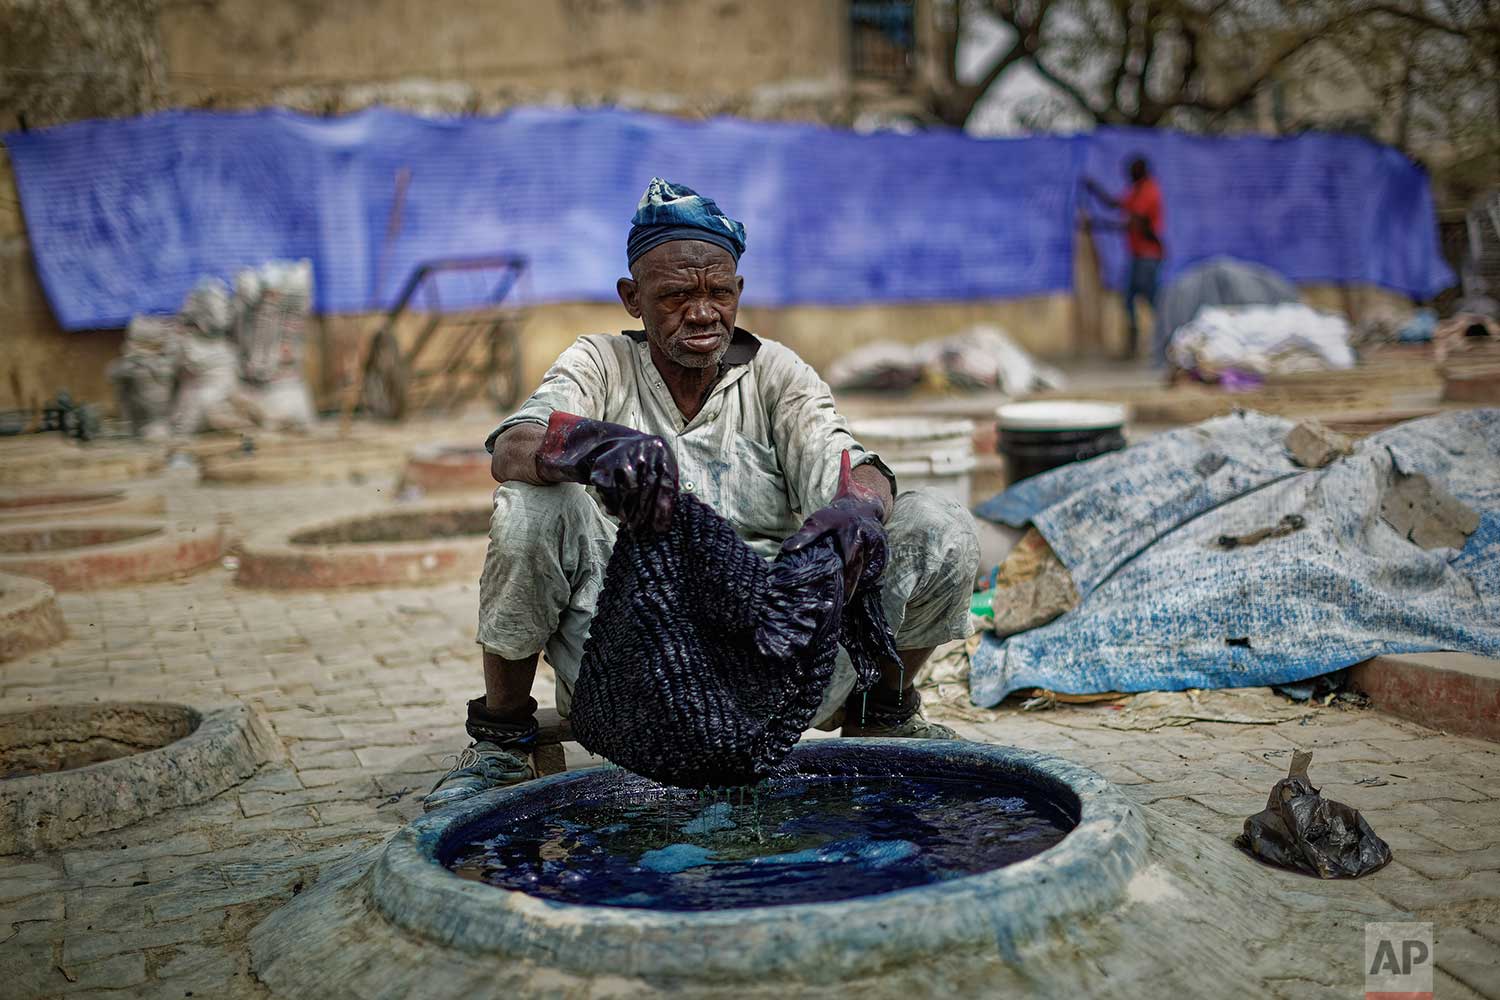  In this photo taken Tuesday, Feb. 19, 2019, a craftsman dyes cloth with indigo in one of the ancient dye pits of Kofar Mata in Kano, northern Nigeria. (AP Photo/Ben Curtis) 